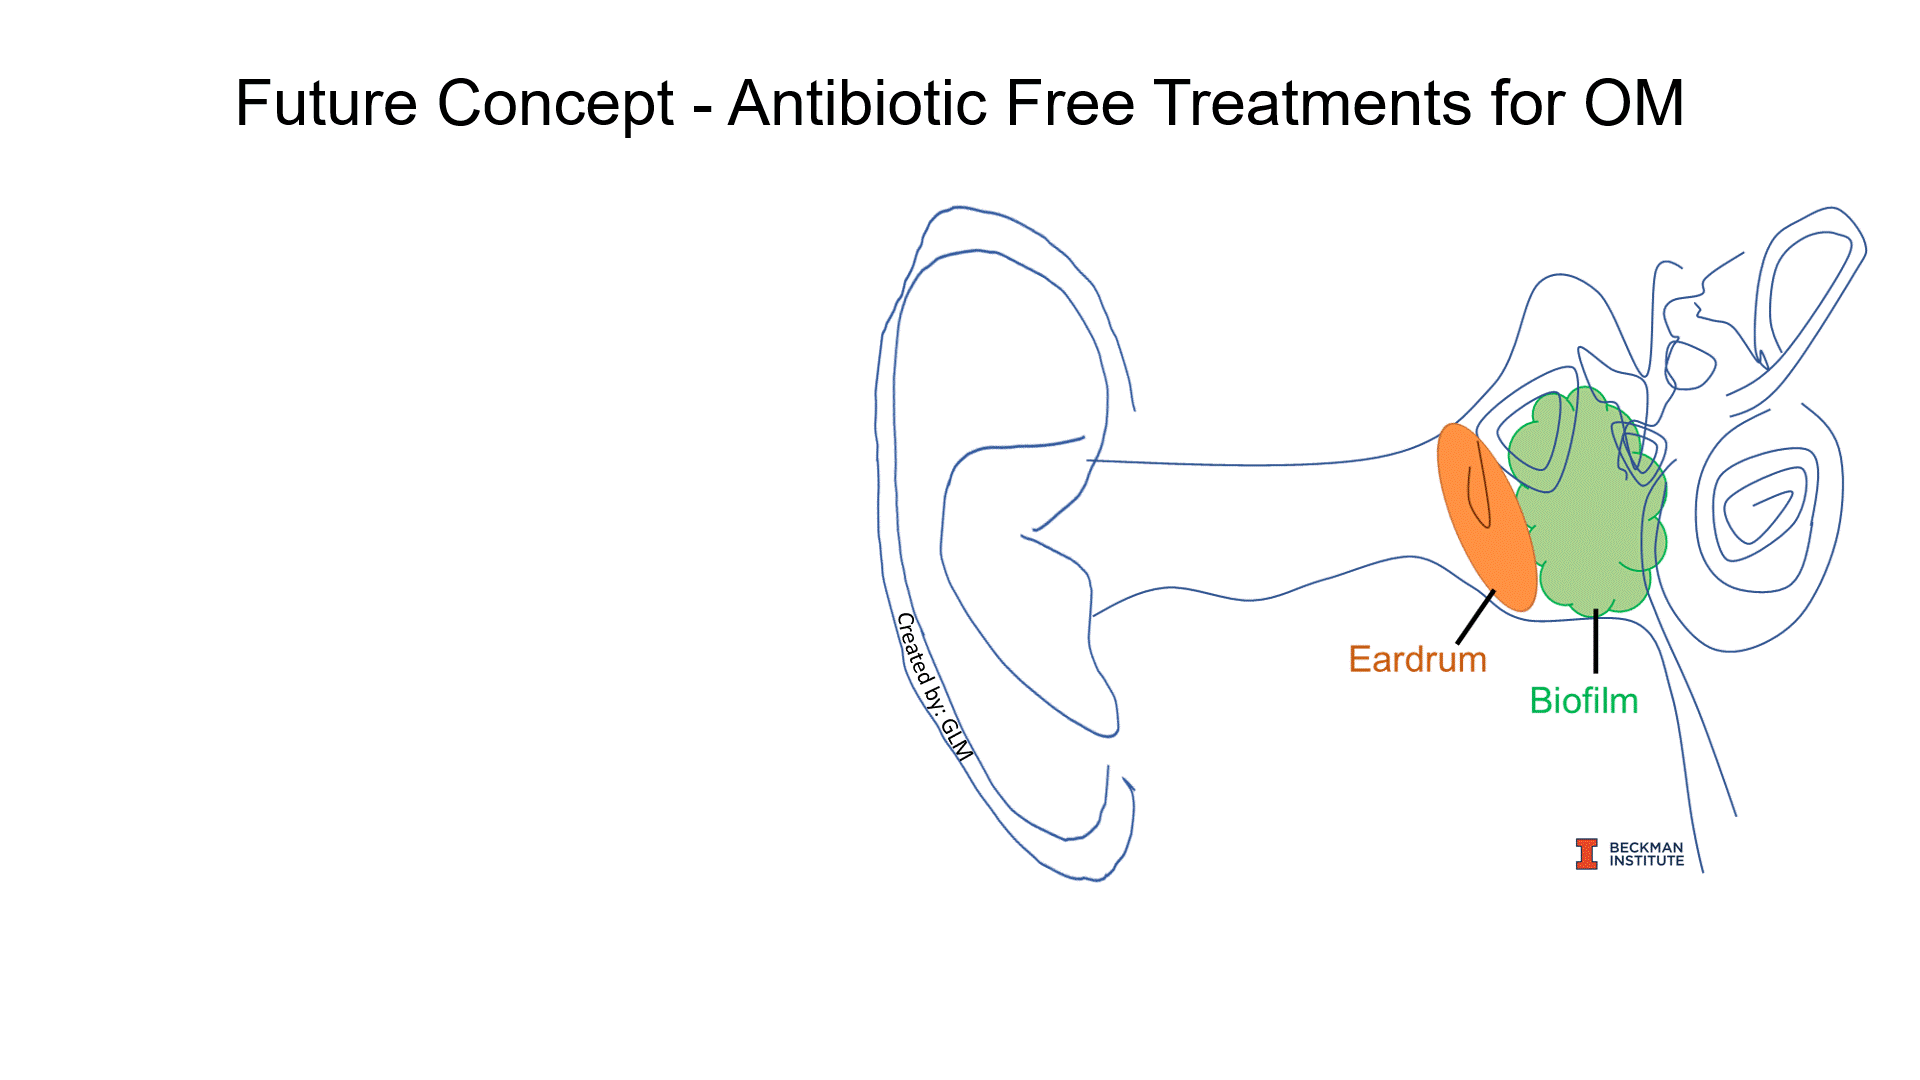 The antibiotic-free treatment Monroy is developing uses a plasma device outside the ear. UV light from the plasma device breaks up individual atoms of oxygen and nitrogen molecules that flow into the ear and reduce bacterial levels.